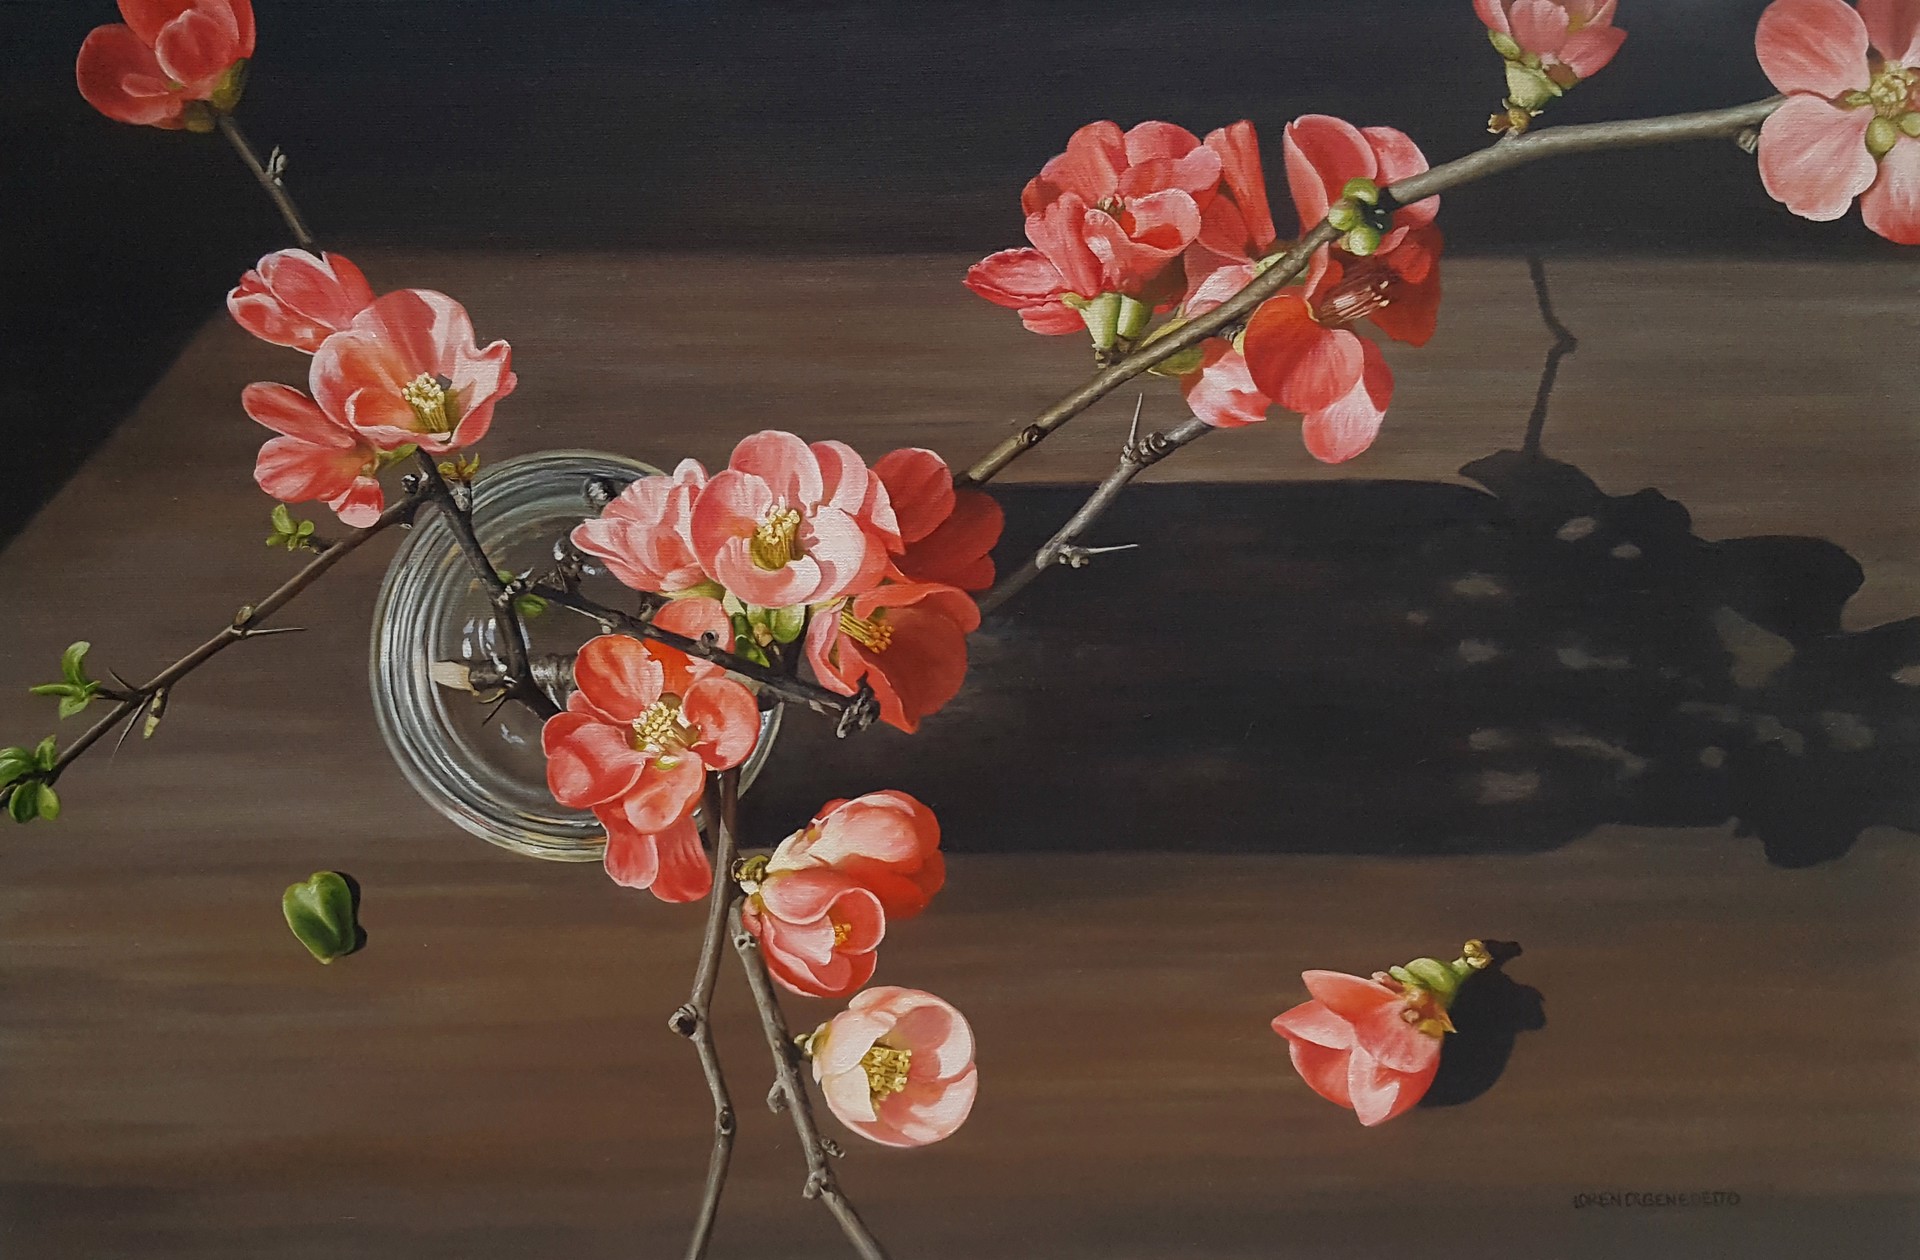 Flowering Quince by Loren DiBenedetto, OPA